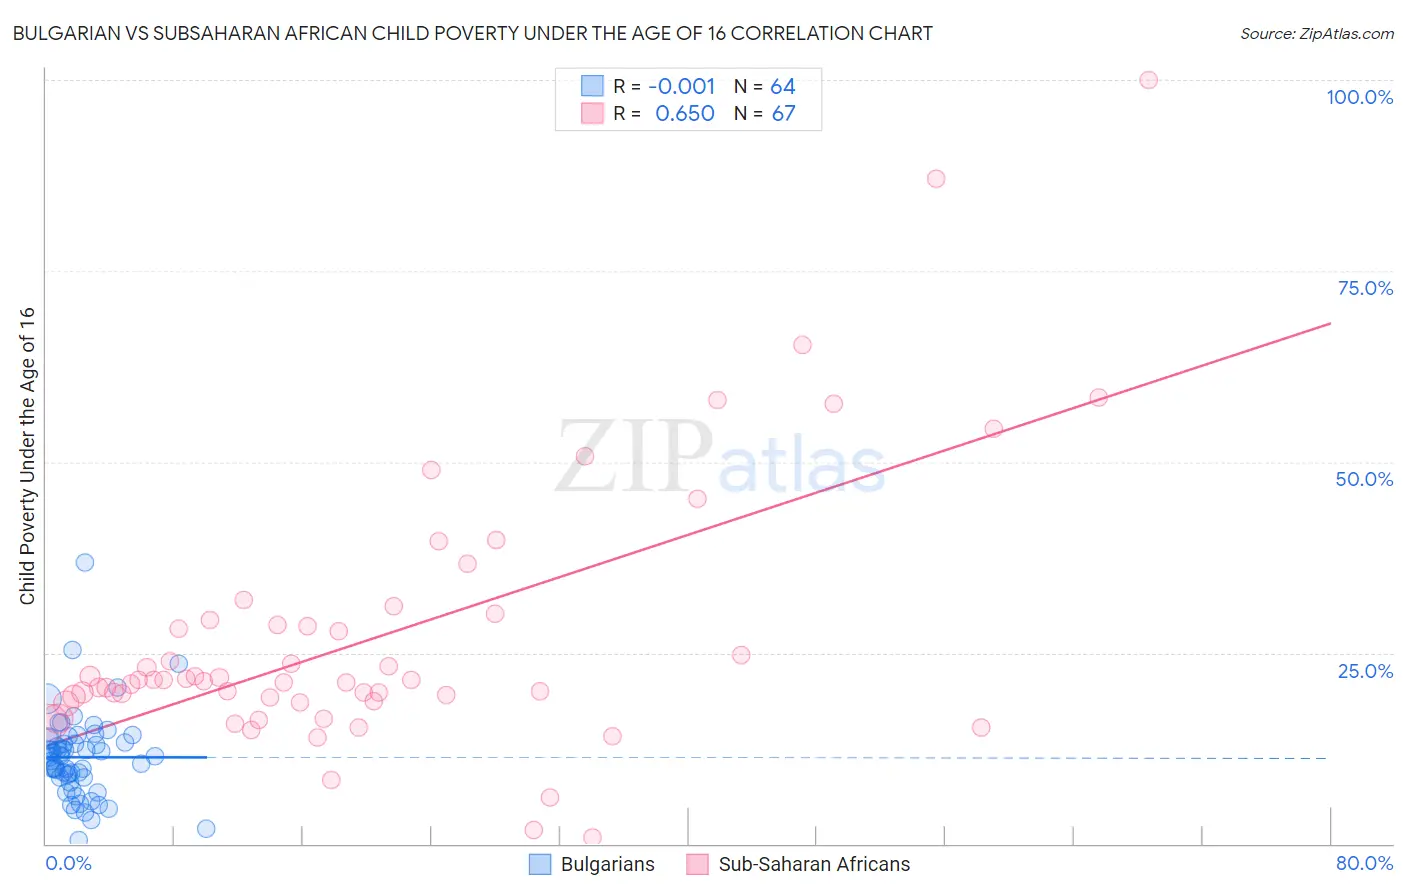 Bulgarian vs Subsaharan African Child Poverty Under the Age of 16